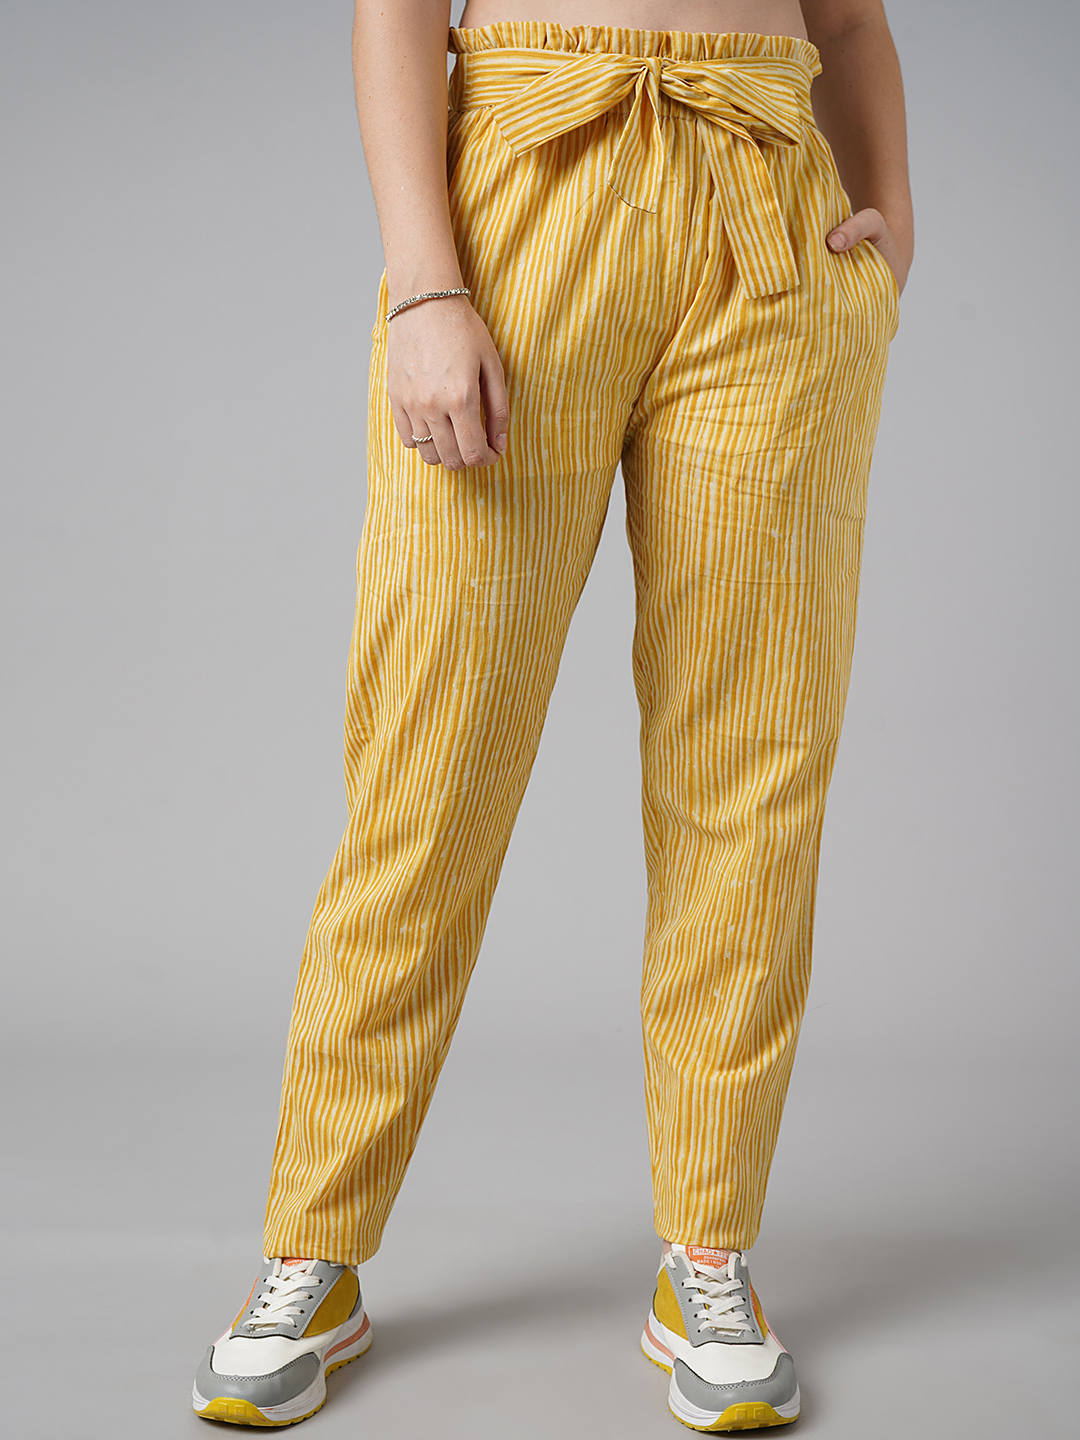 Cotton Plain Tensile Trouser For Women With Pocket Size 300